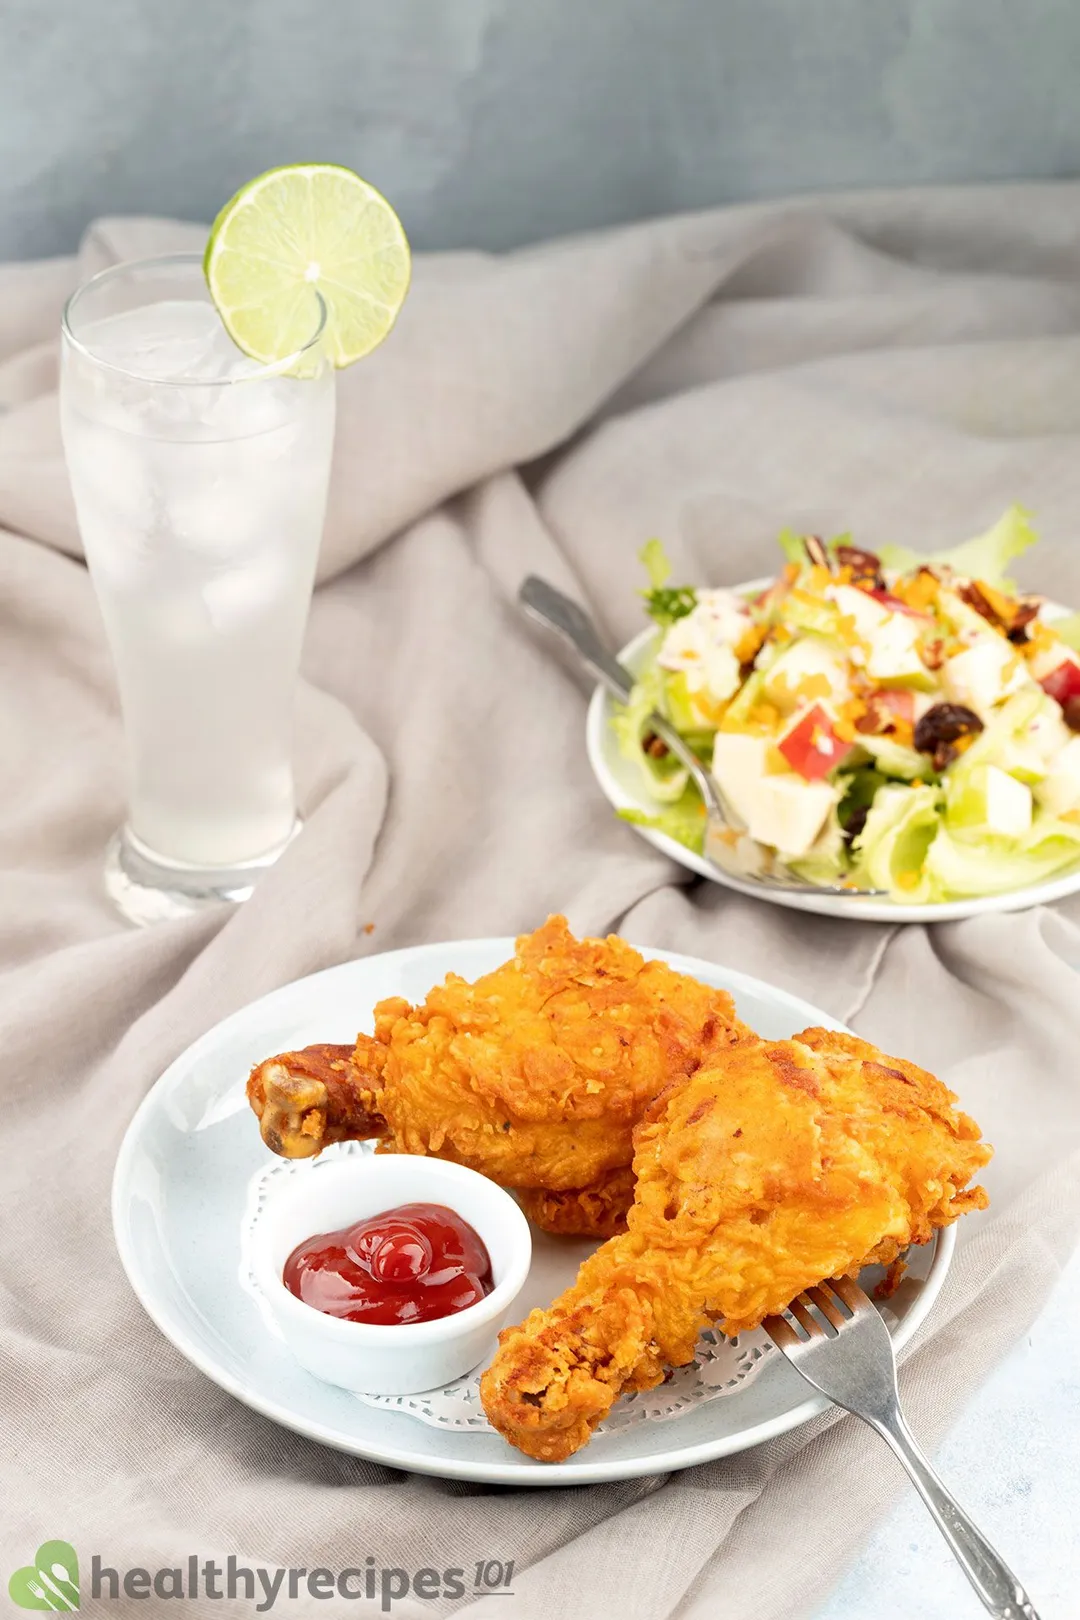 a plate of two cooked chicken drumsticks next to a plate of salad and a glass of juice